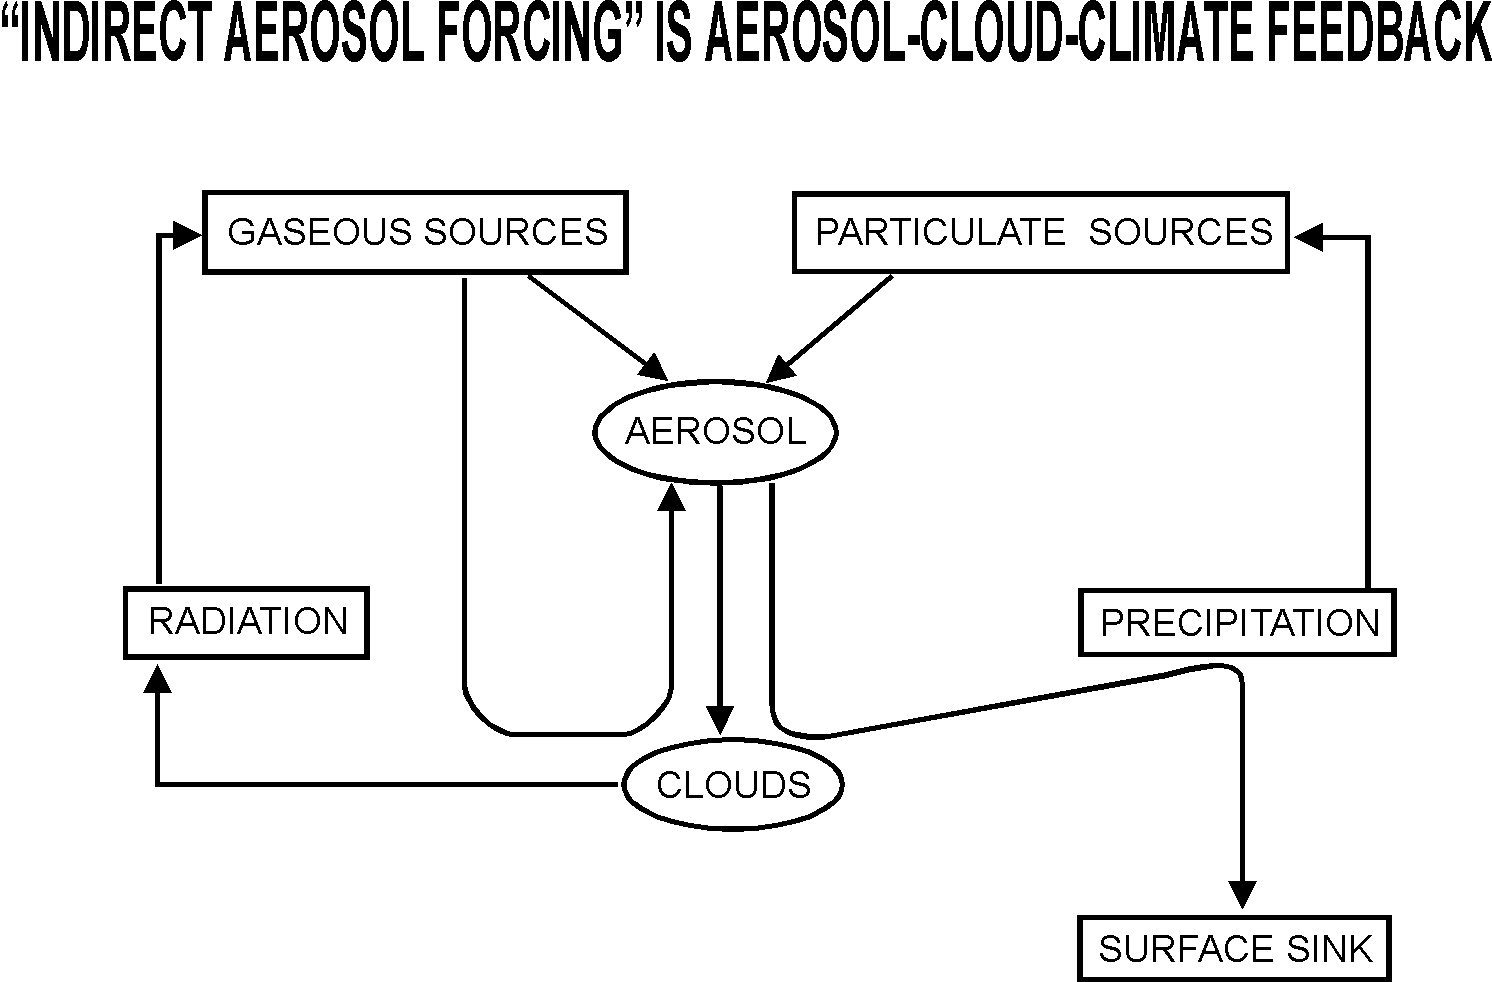 Flow chart of indirect aerosol forcing as climate feedback